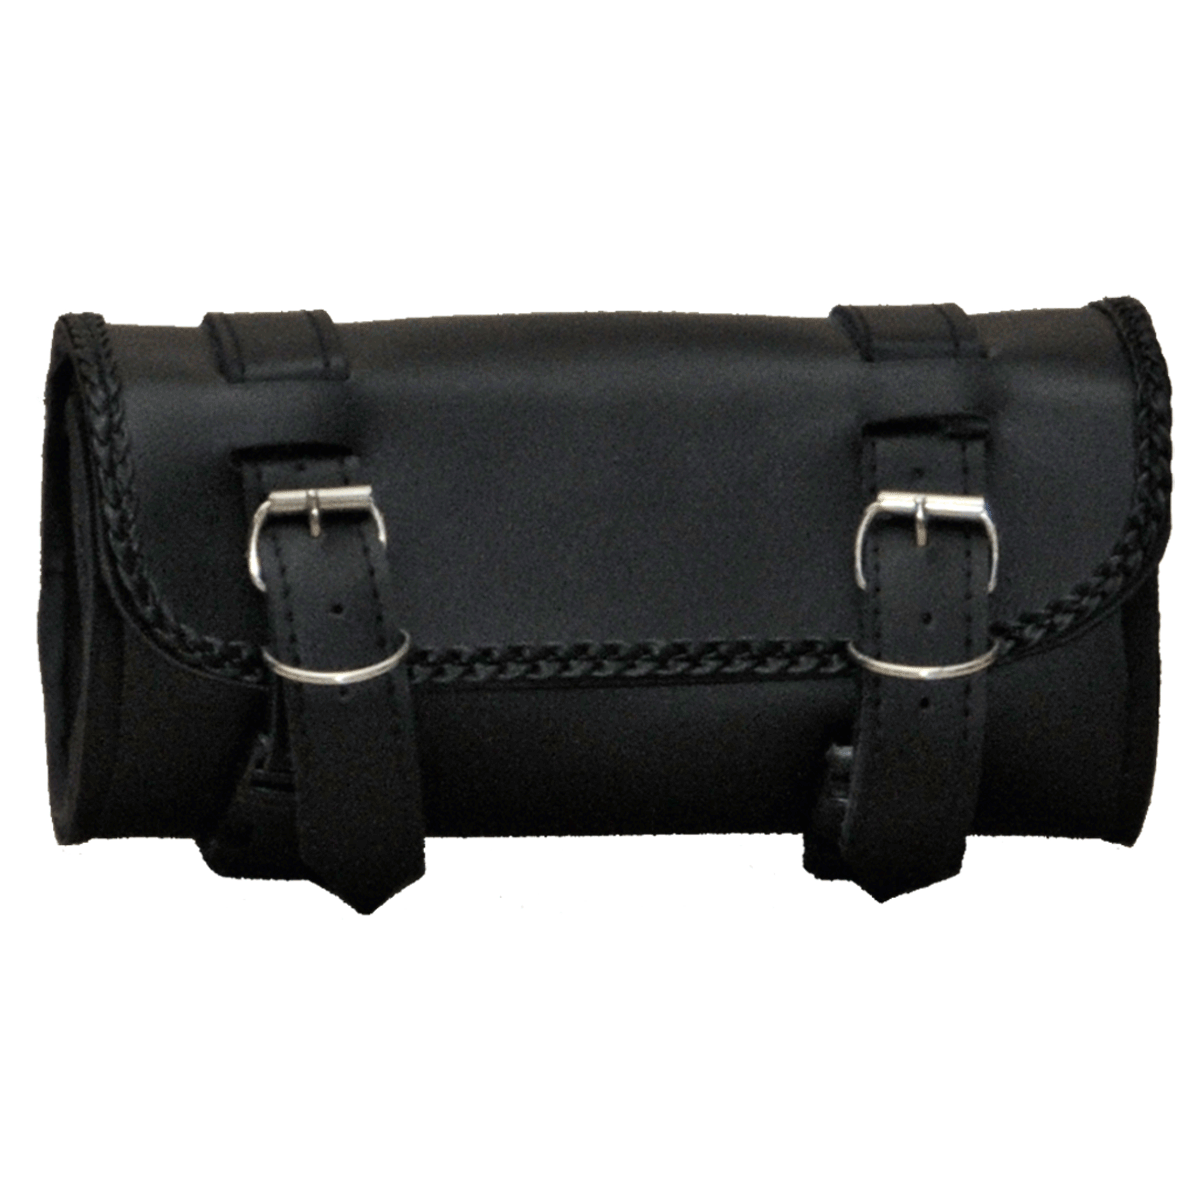 VS114H 2 Strap Braided Tool Bag with Quick Releases